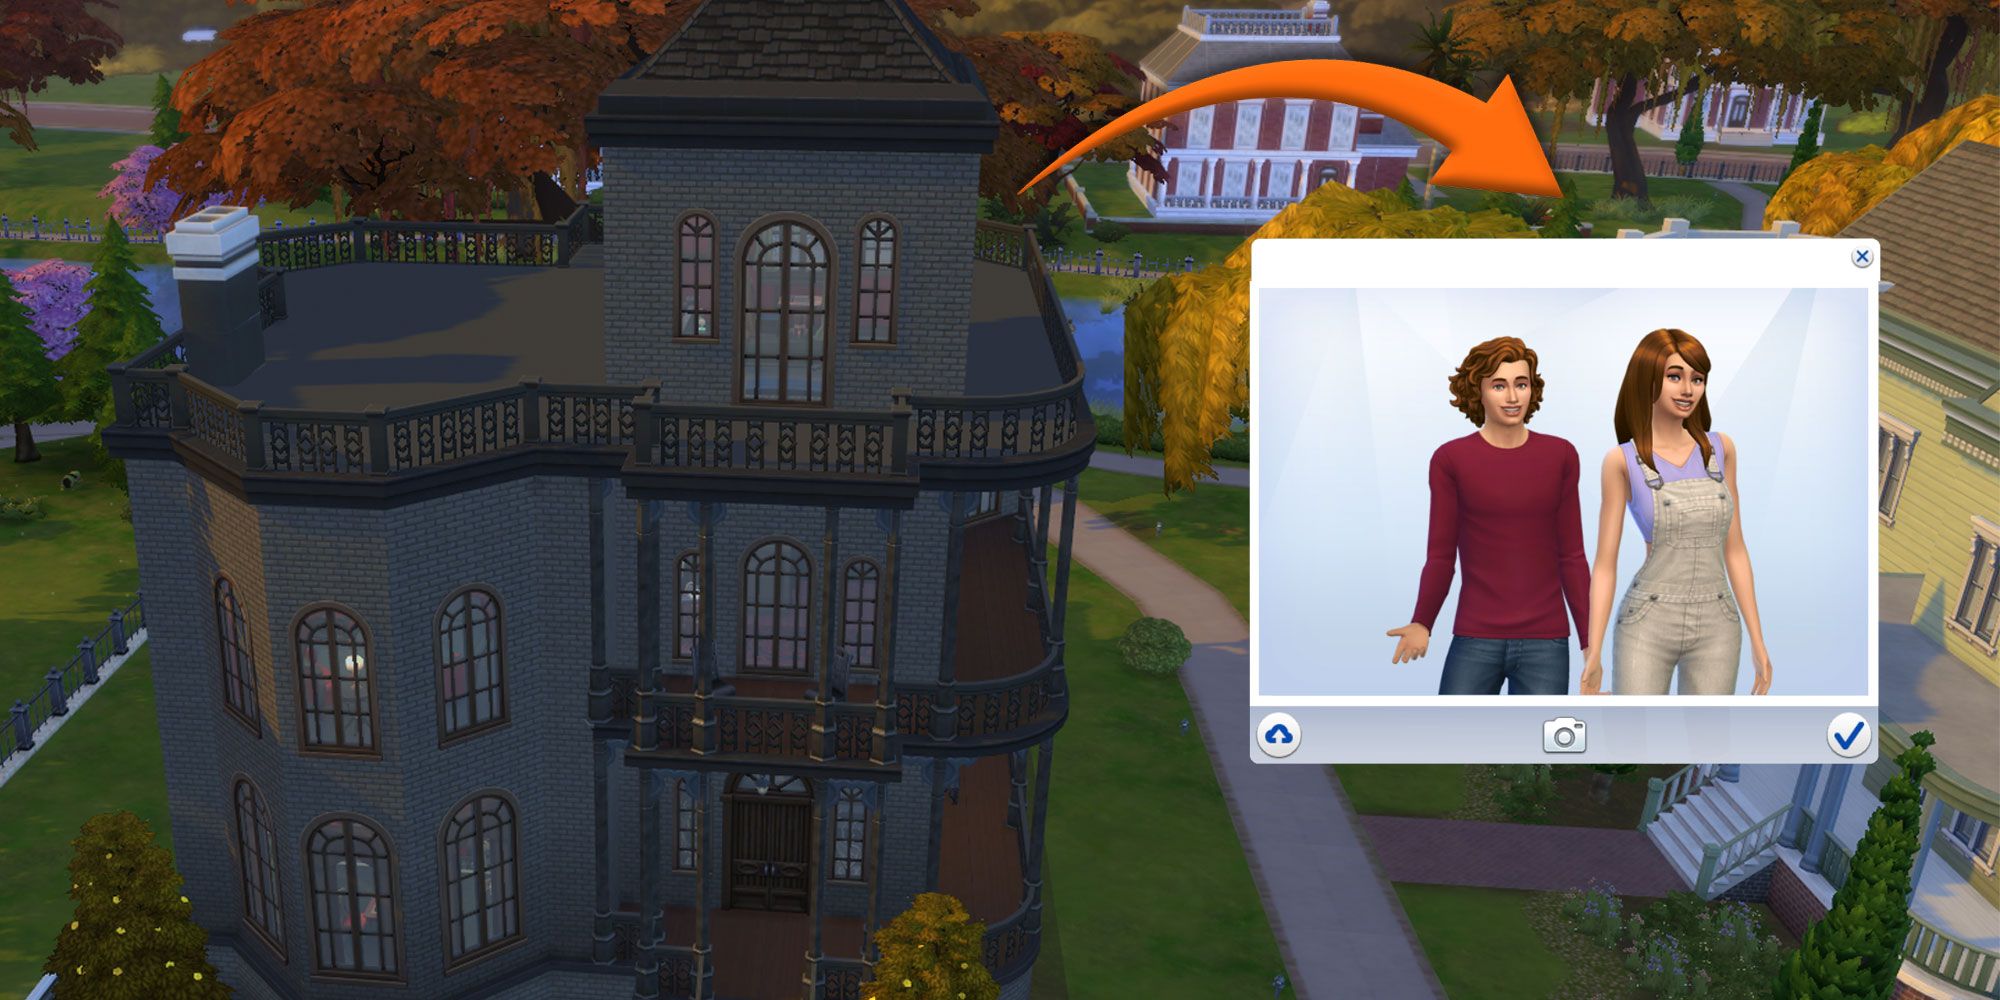 A big mansion in The Sims 4. An arrow points from it to a window where a male and female Sims are seen posing.